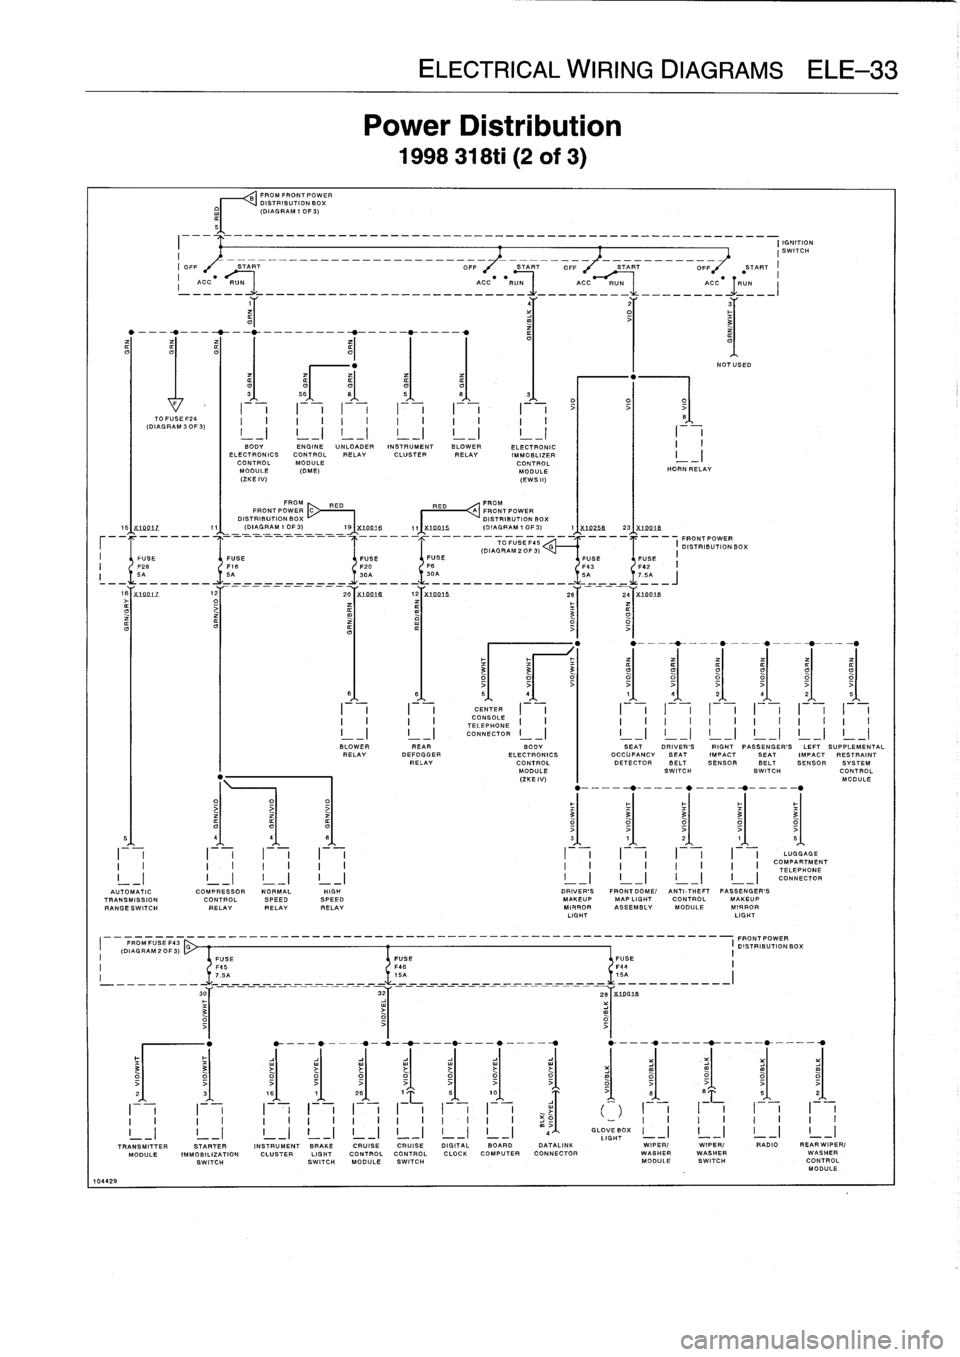 BMW 323i 1998 E36 Owners Guide 
10442
9

II
OFF

TO
FUSE
F14
(DIAGRAM
3
OF
3)

----------------------------------------------------
I
IGNITION
I
SWITCH
START
-----------------
OFF
--
START

	

OFF

	

START
----
OFF

	

START
I

a
